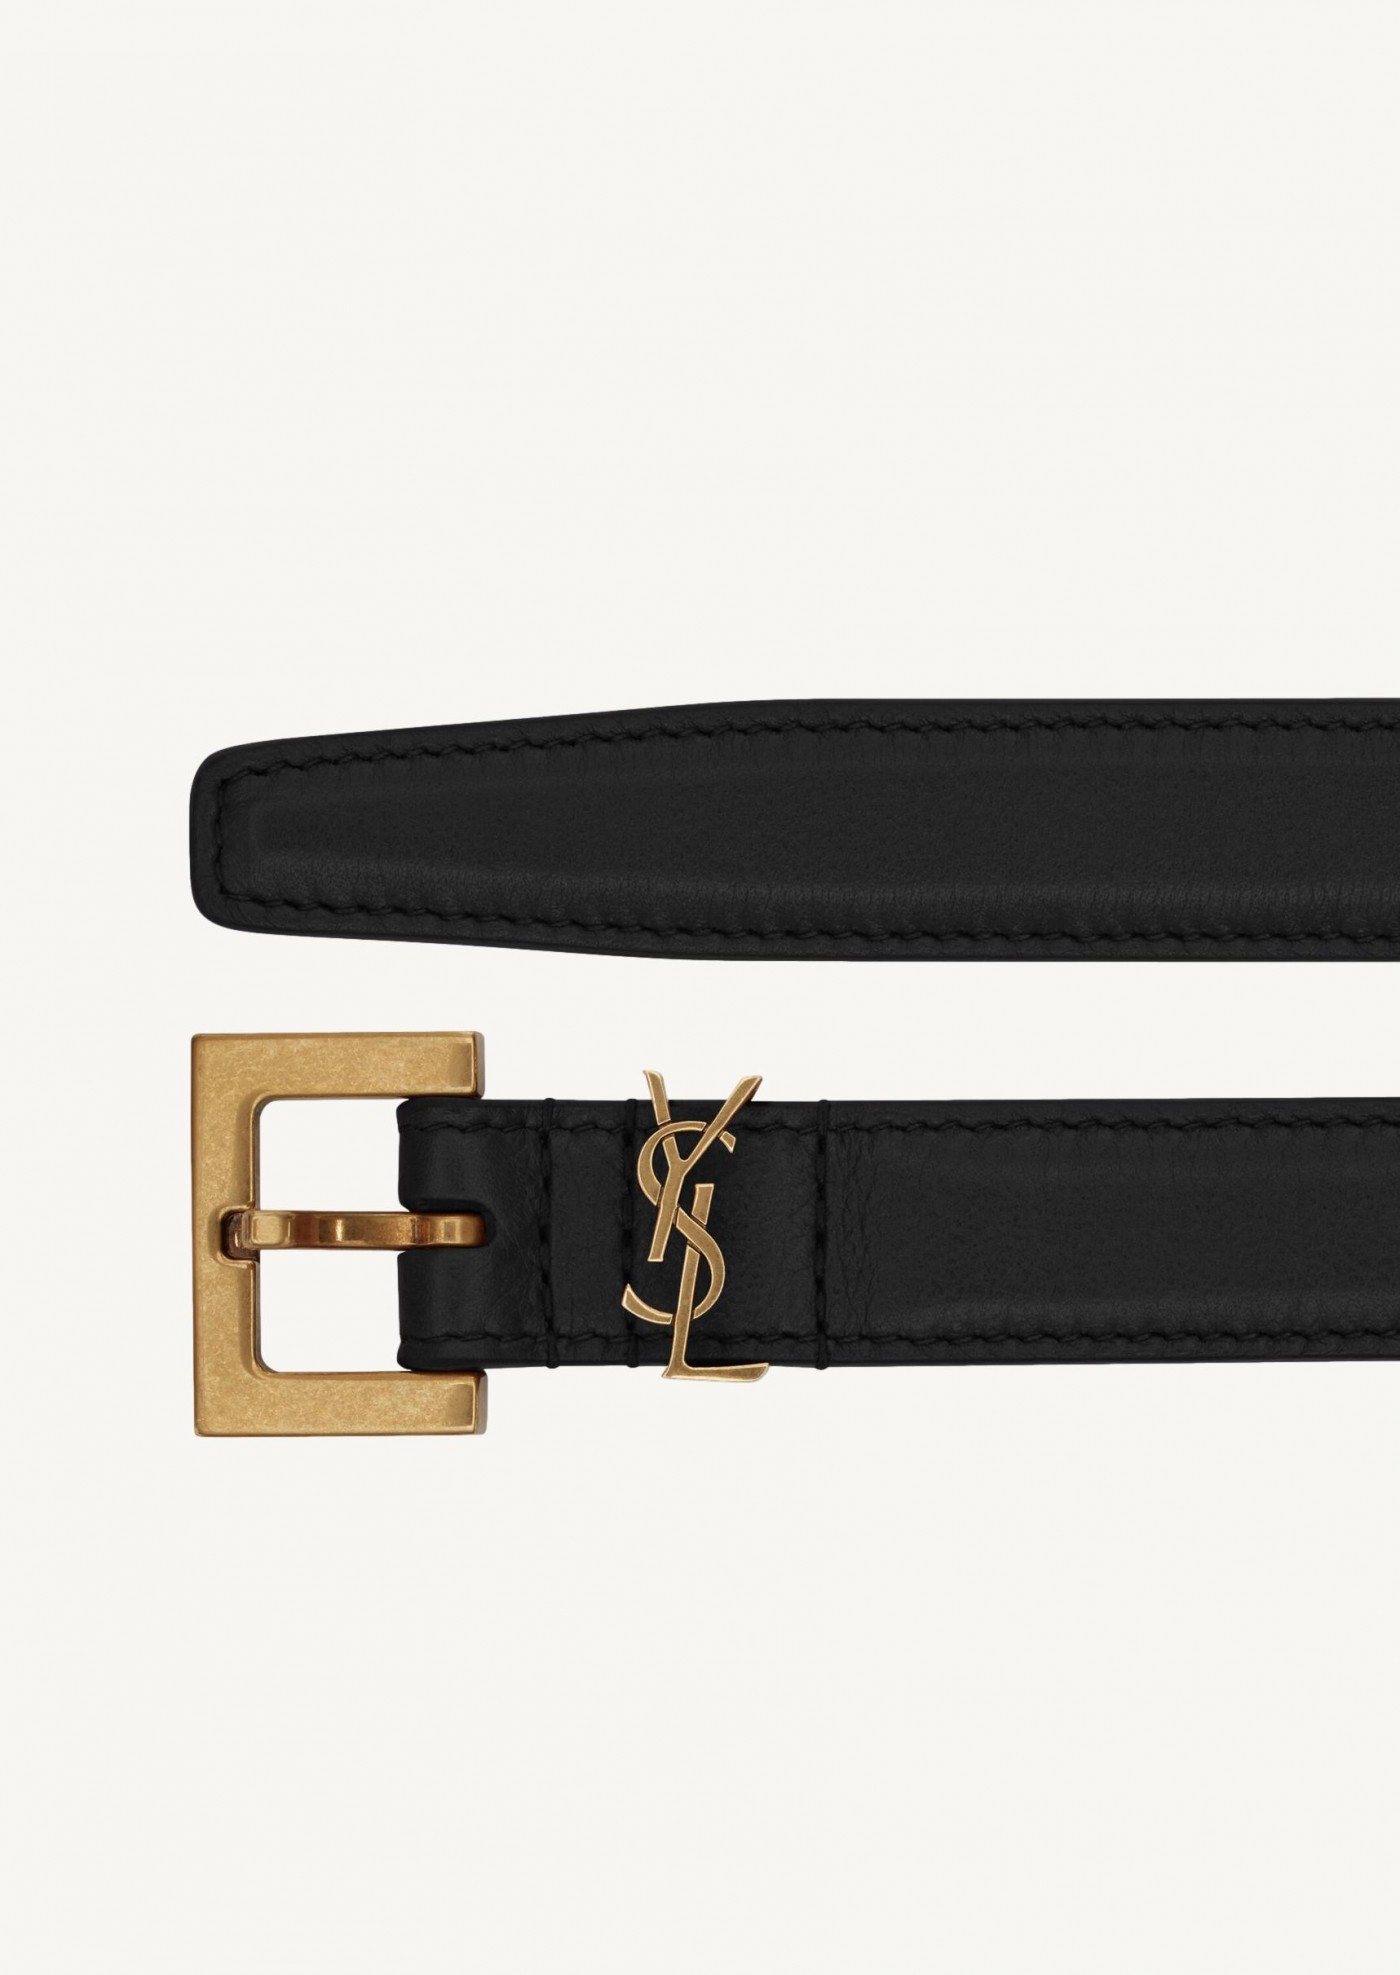 Fine cassandre belt in smooth black and gold leather